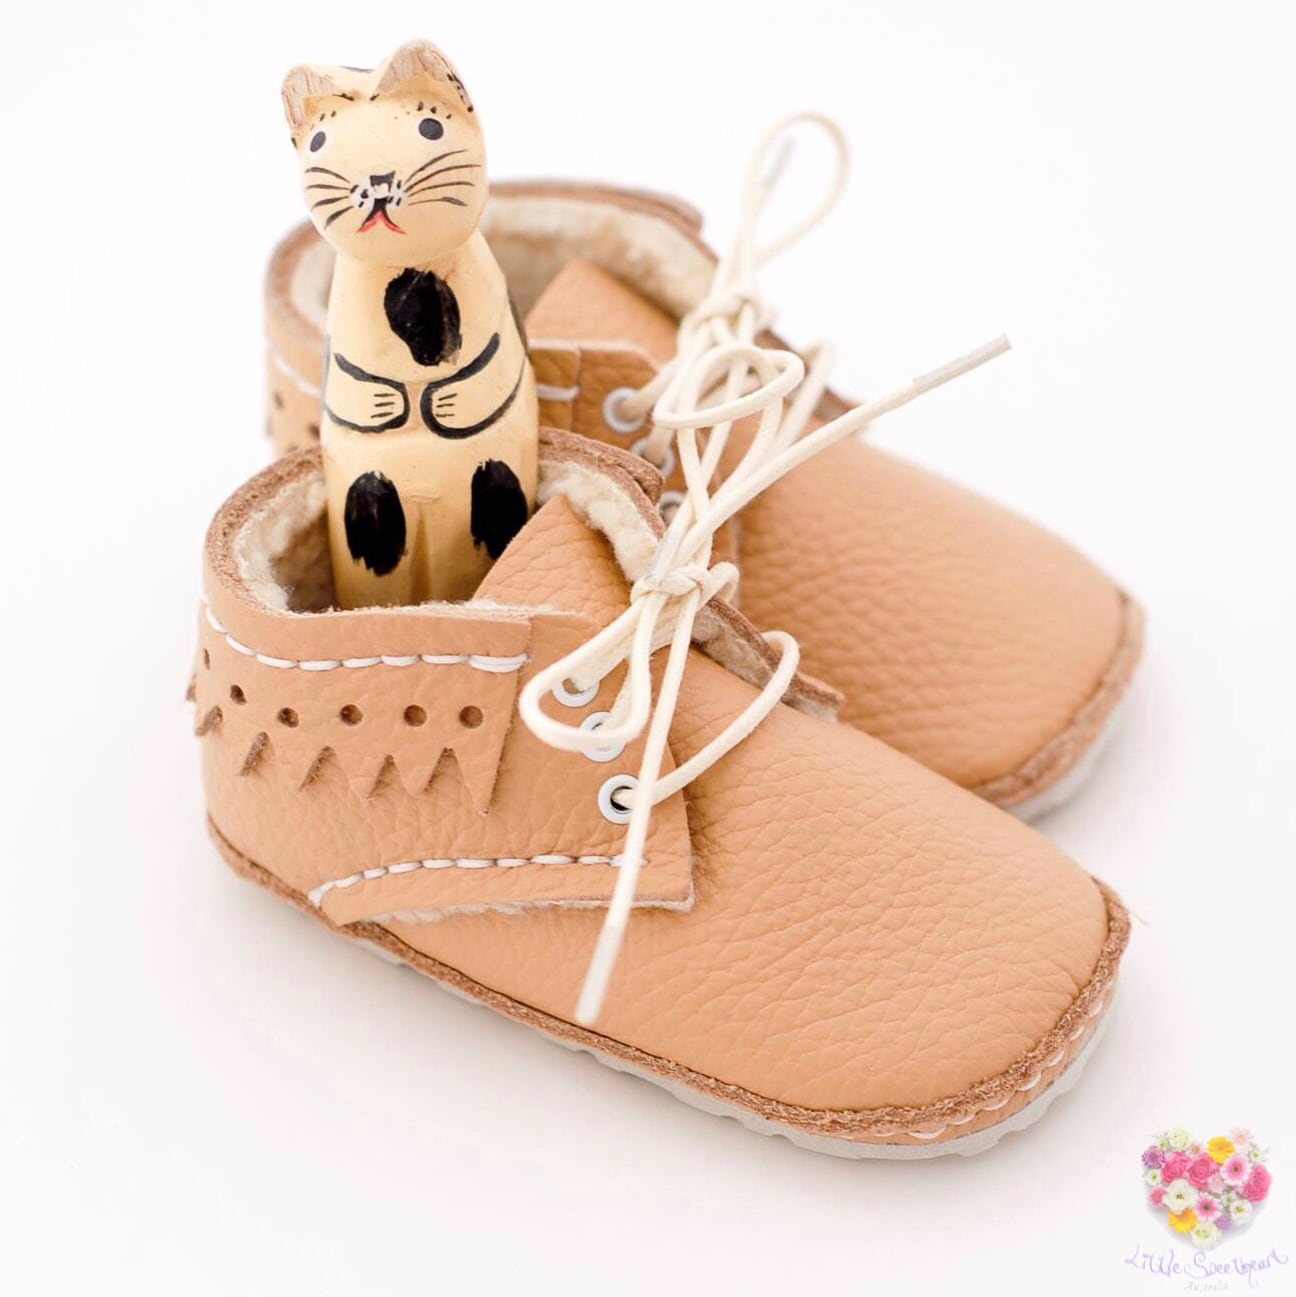 First Baby Shoes》Model : NIKA ファーストシューズ手作りキット Champagne × Champagne |  Little Sweetheart Australia